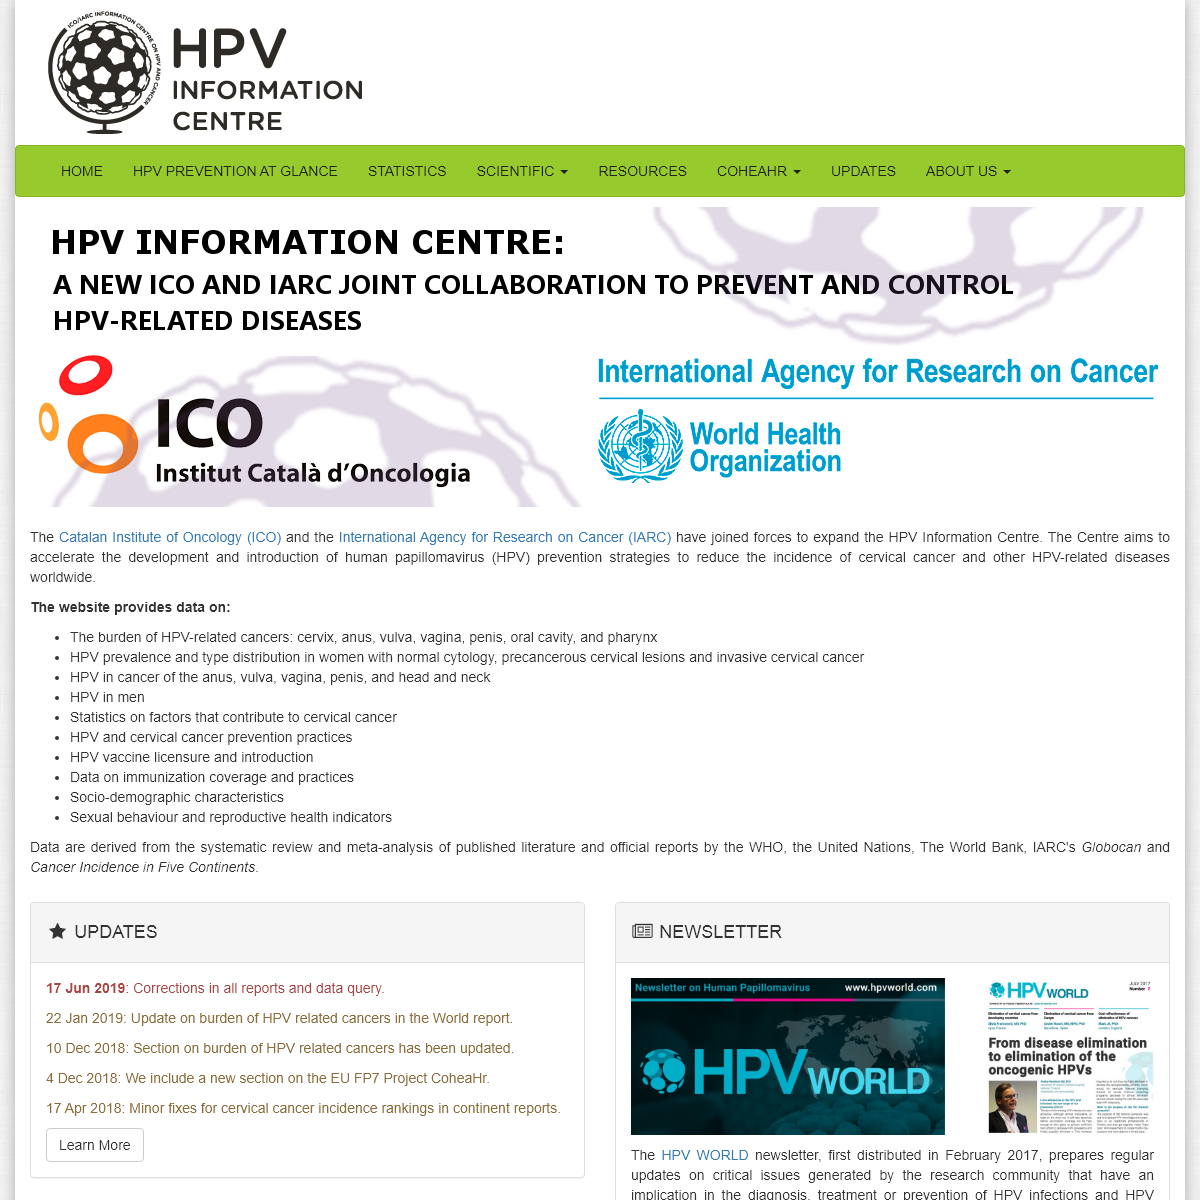 A complete backup of hpvcentre.net